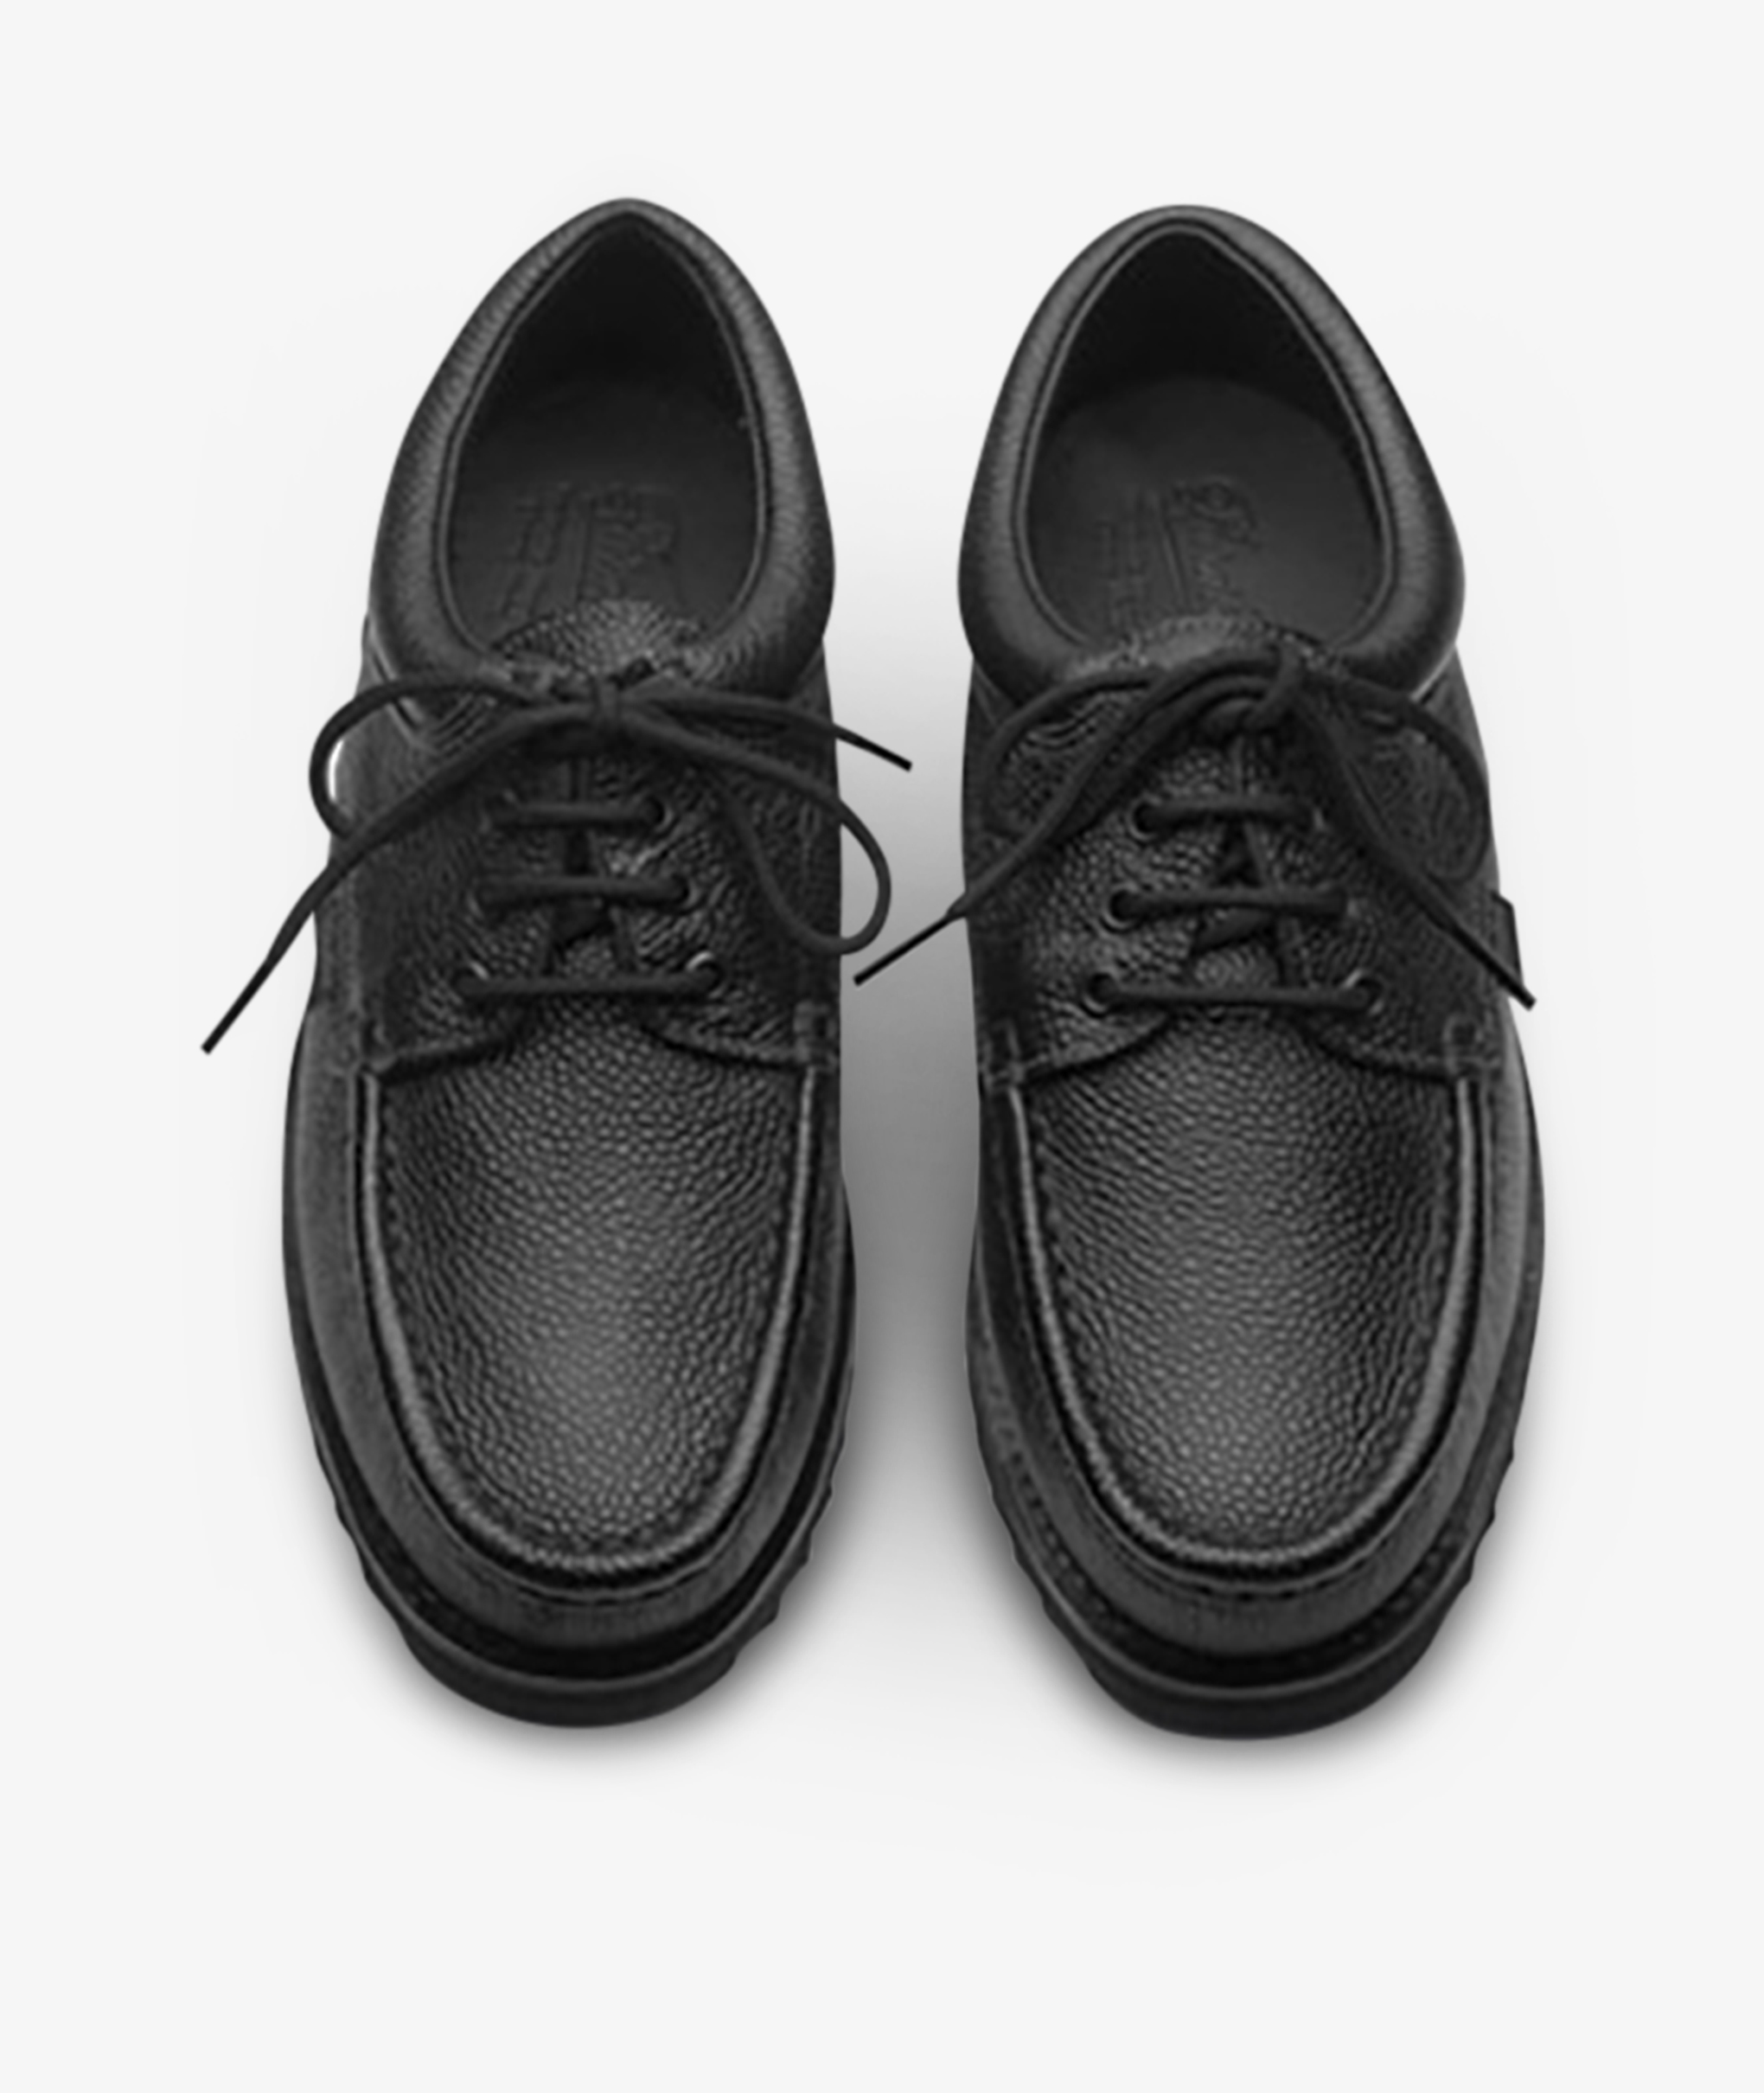 Norse Store | Shipping Worldwide - Paraboot THIERS/SPORT - NOIRE 